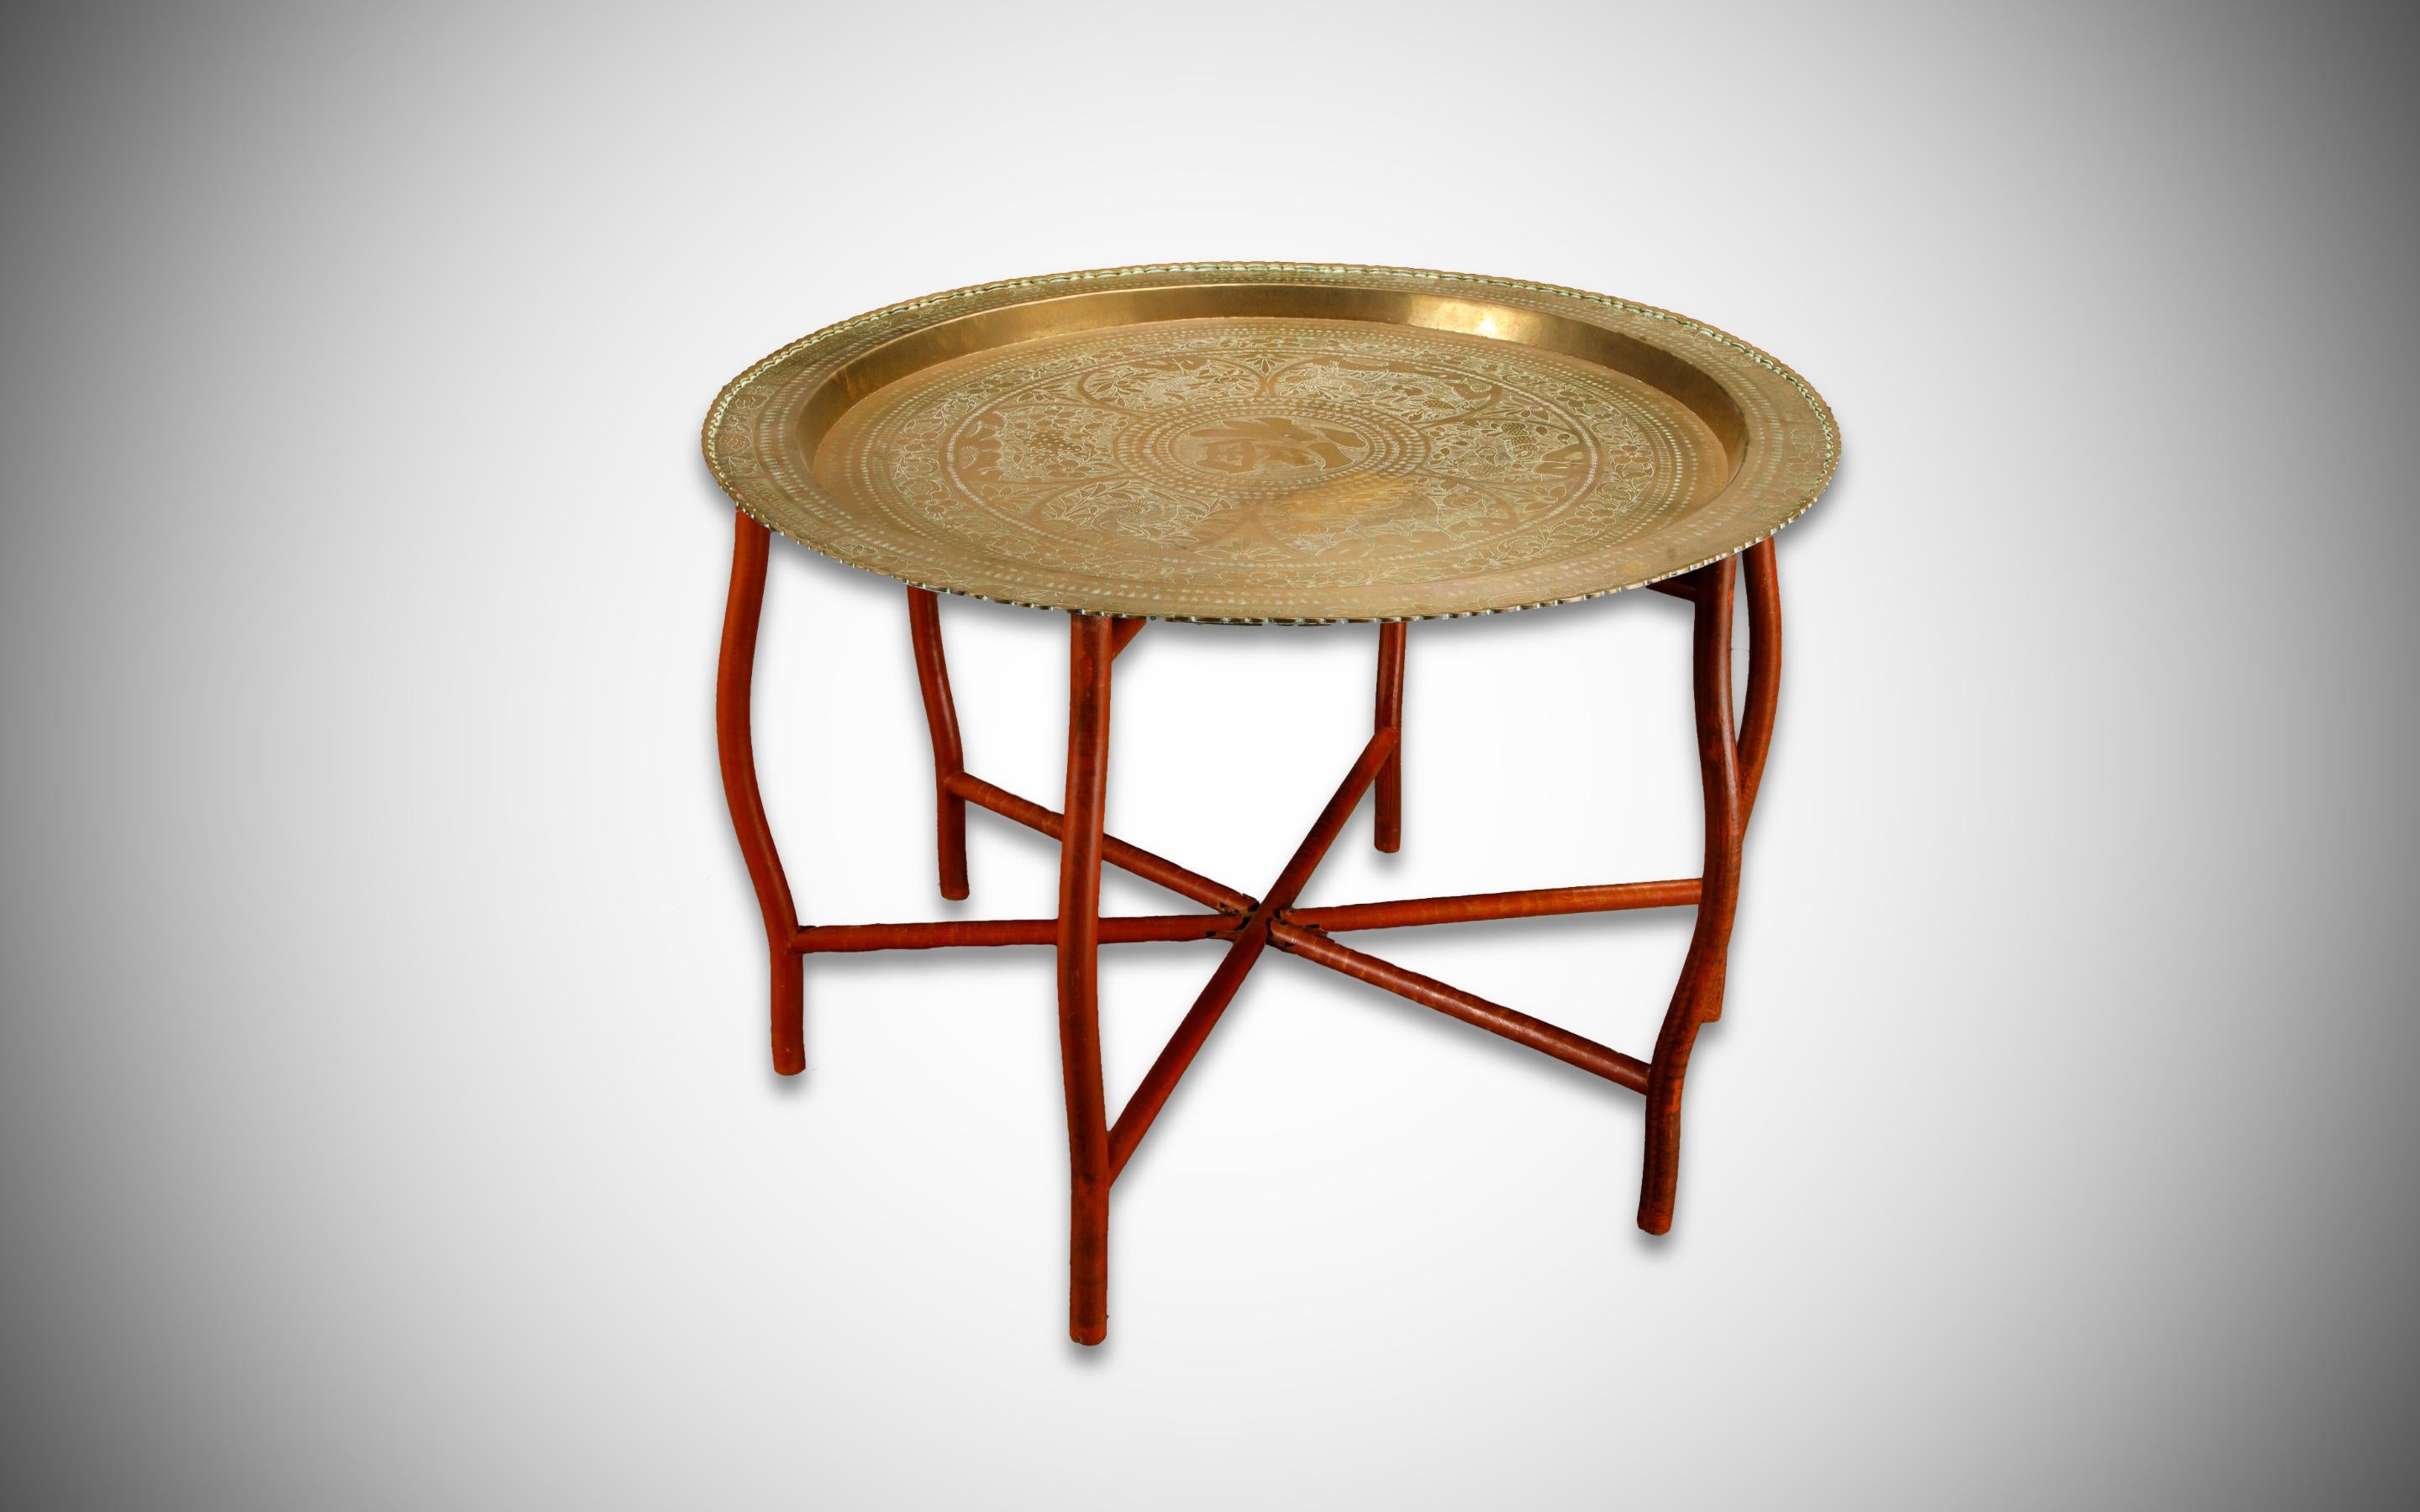 Mid-20th Century Asian Engraved and Hammered Brass Tray Table with Foldable Wood Base, c 1960s